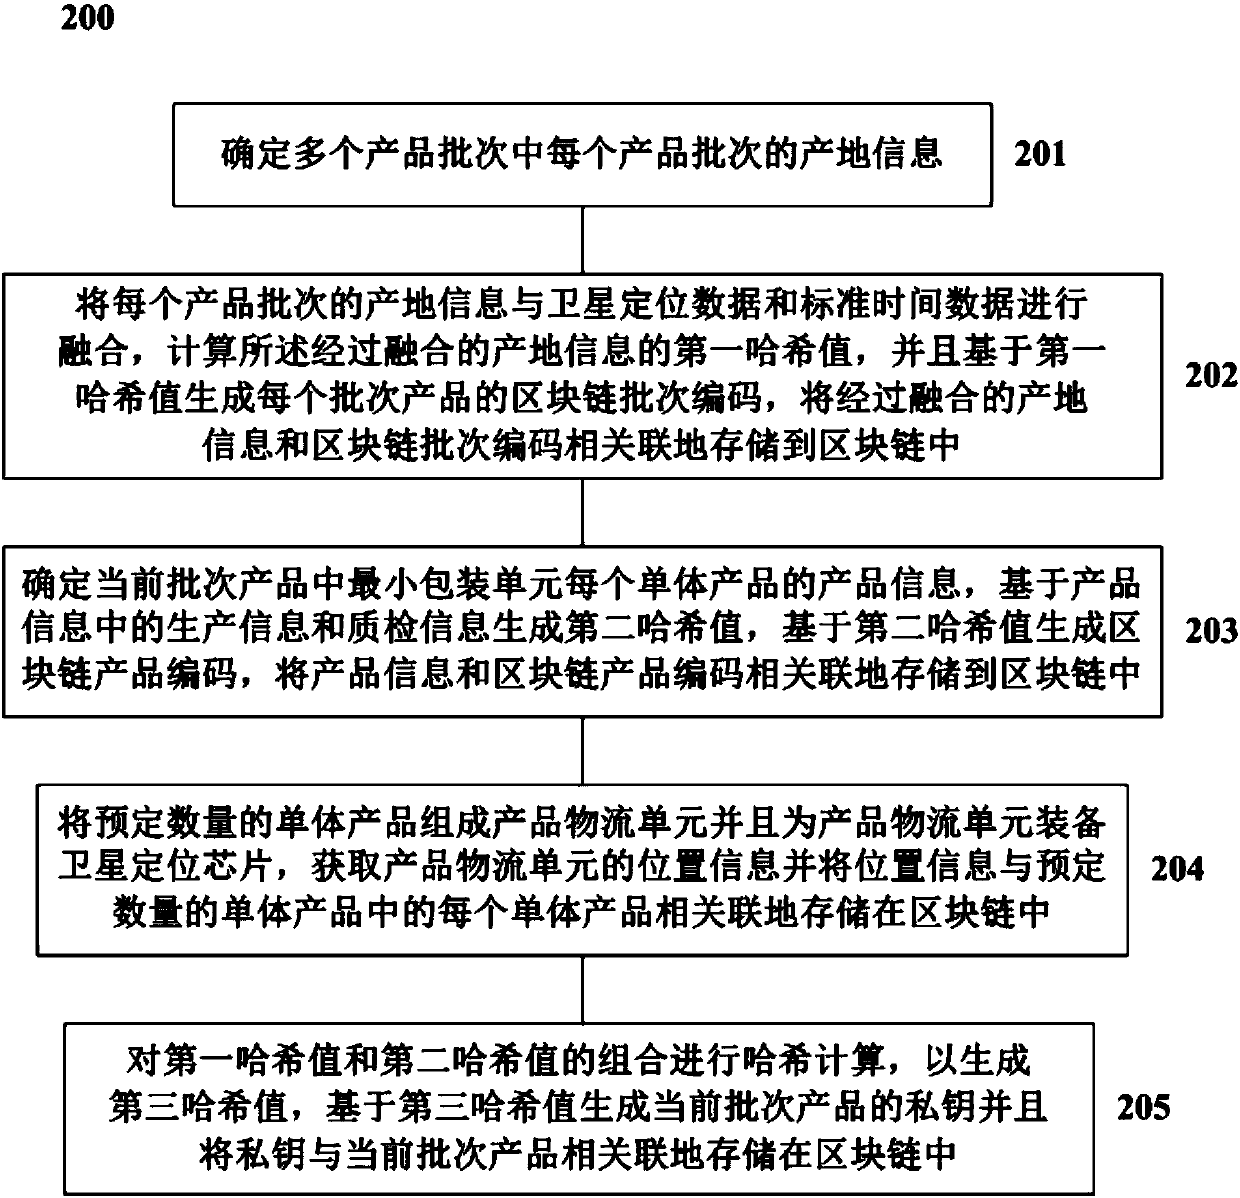 Method and system for providing product tracing